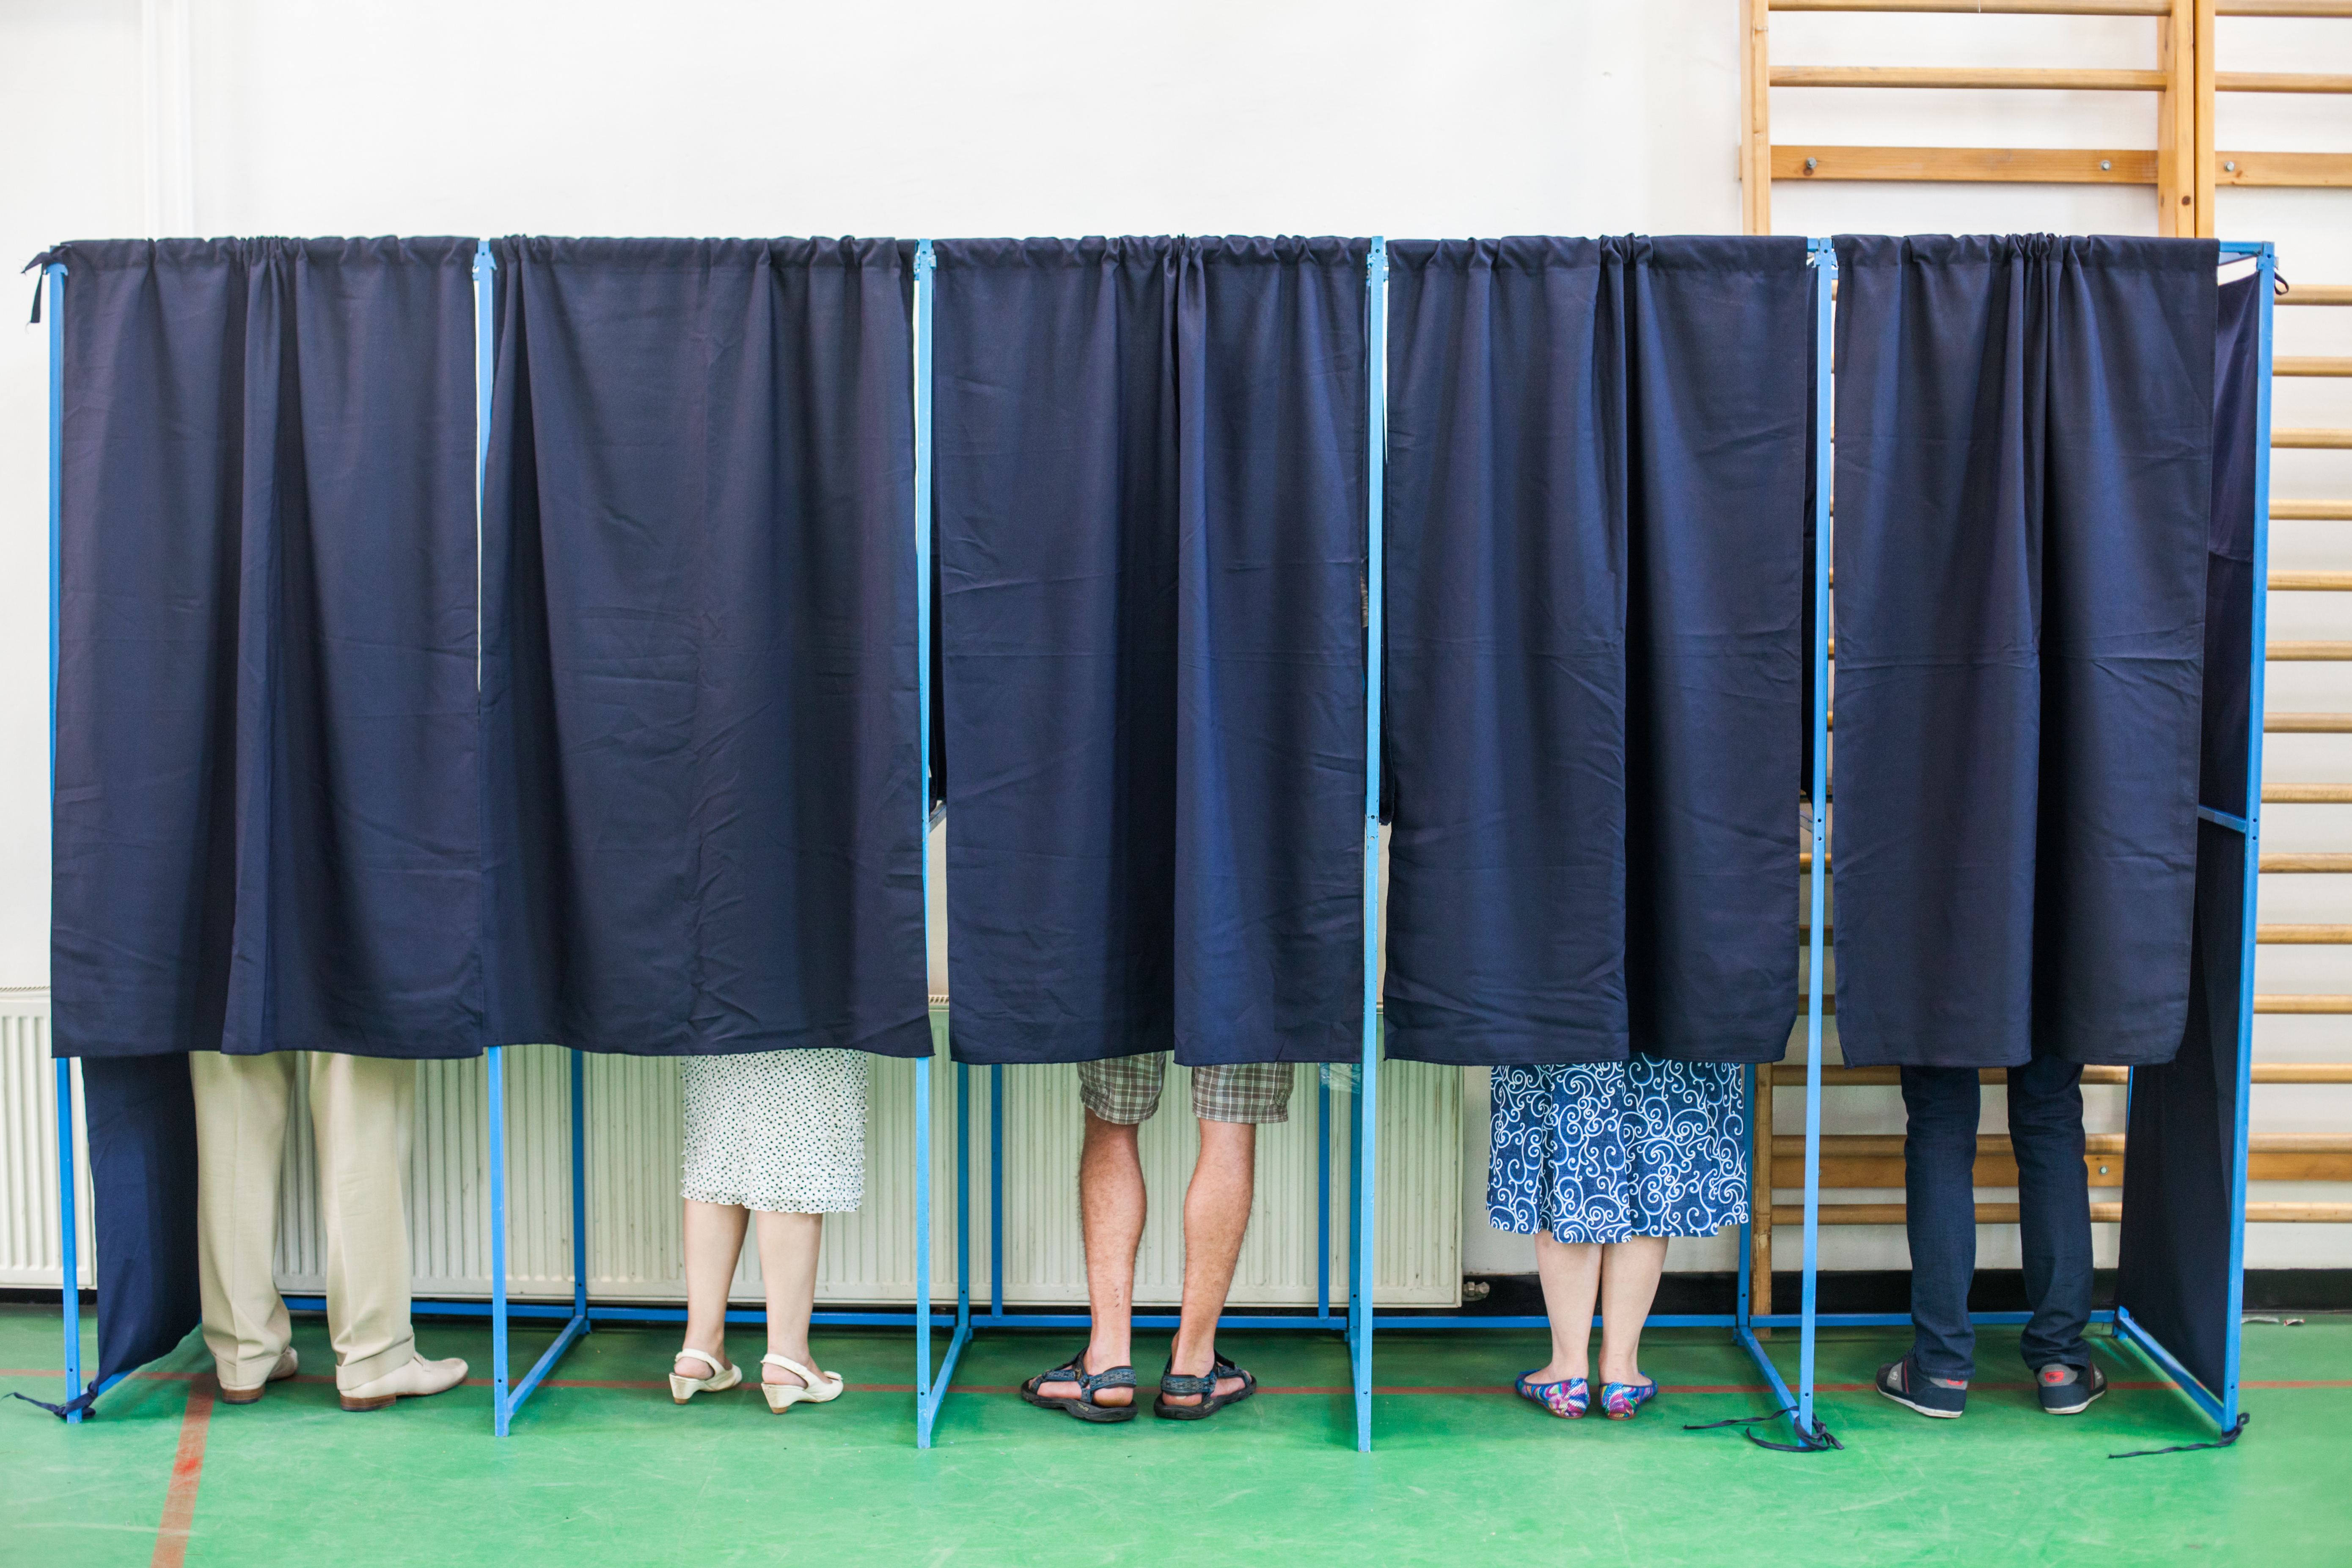 People standing behind curtains at a polling/voting station